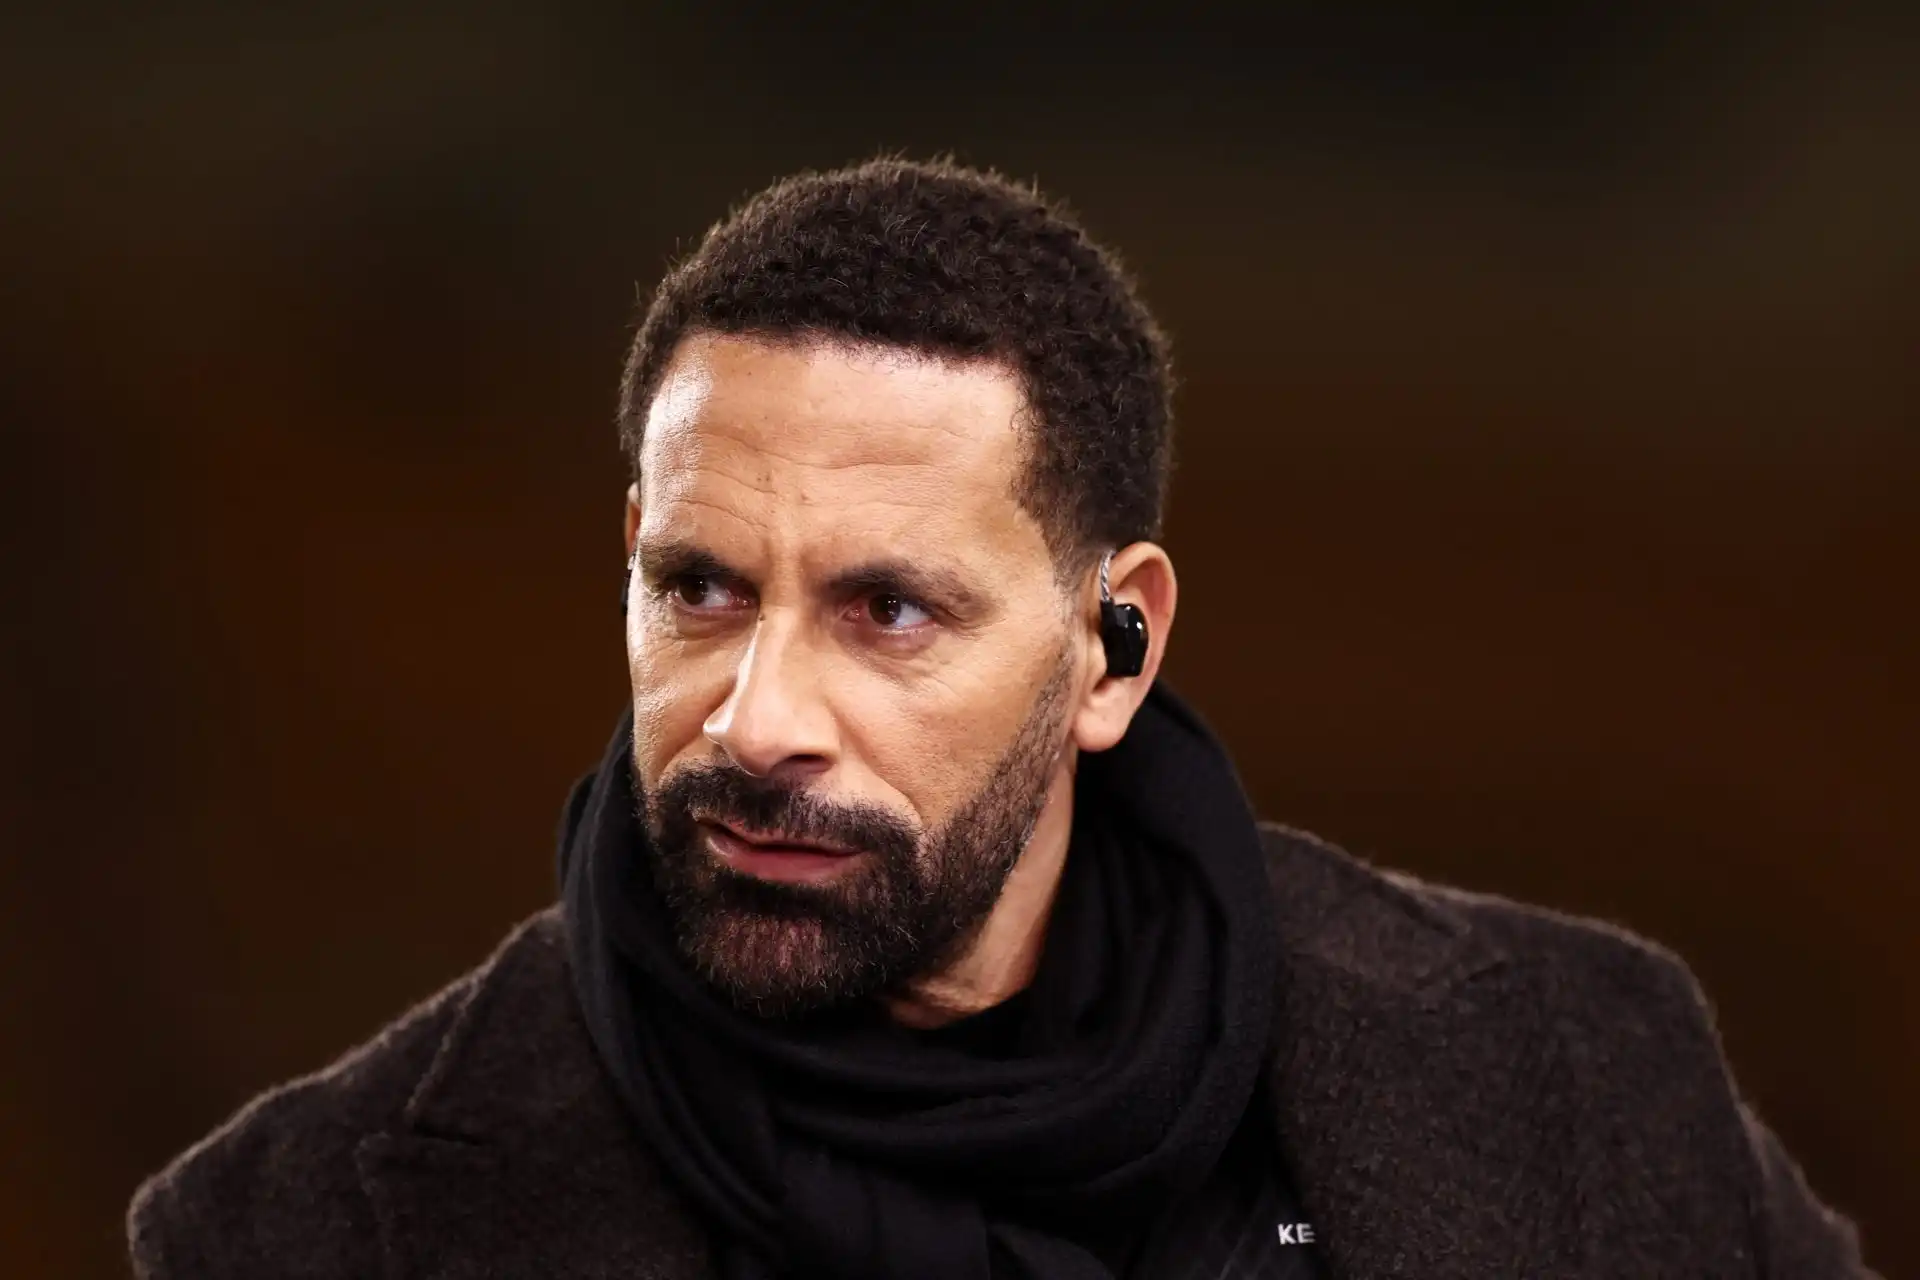 Rio Ferdinand claims Manchester United should never have sold £18m player under Ole Gunnar Solskjaer